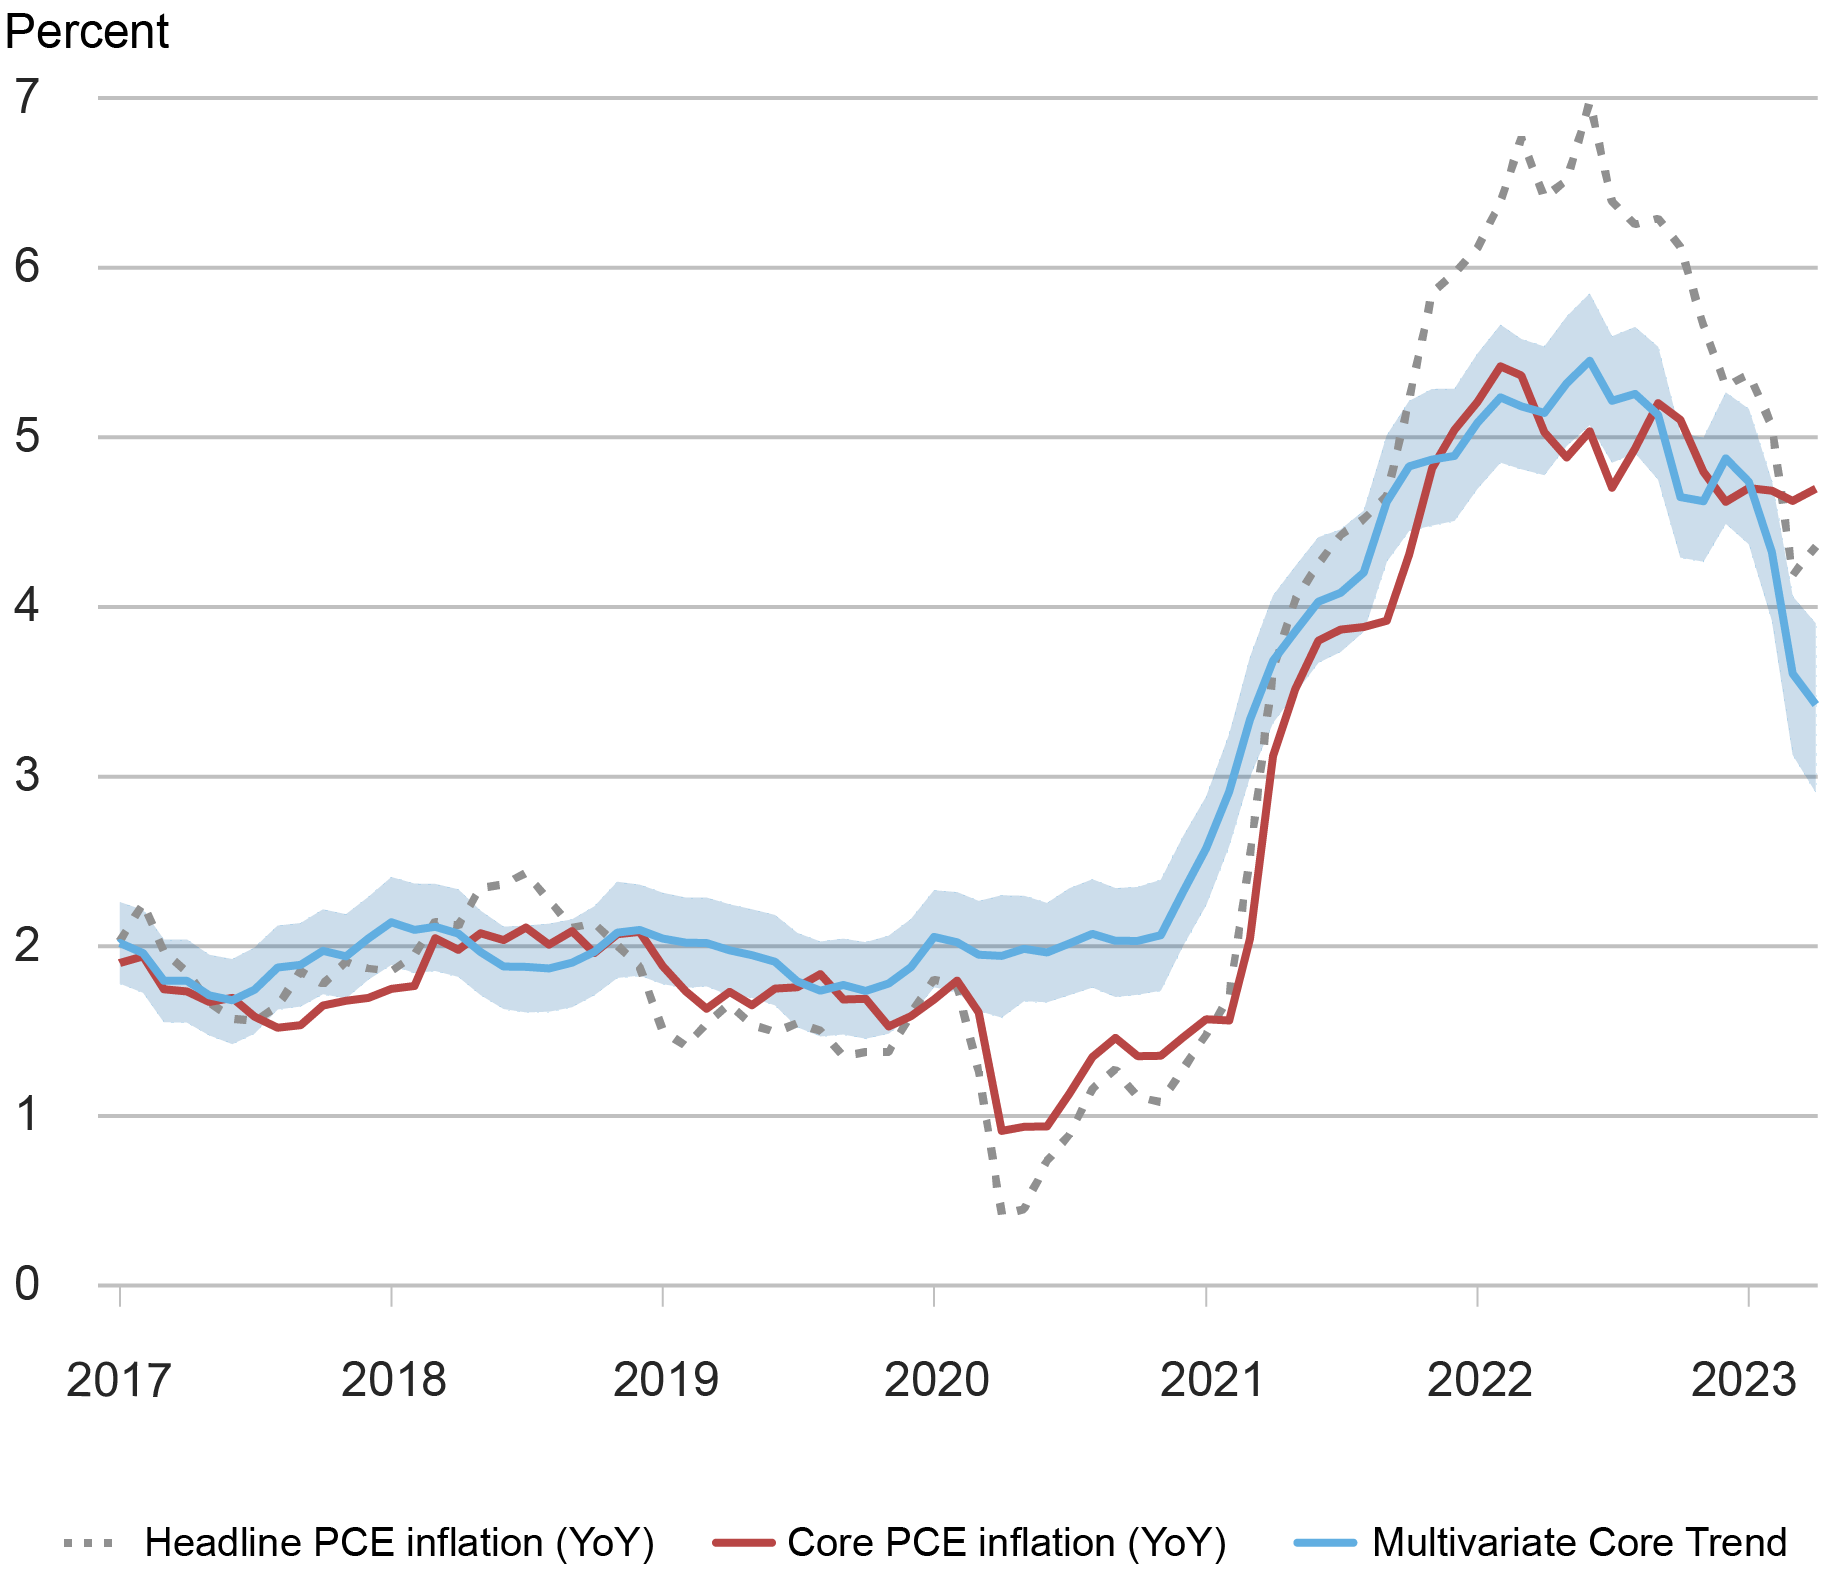 Line chart showing the Multivariate Core Trend (MCT) inflation estimates alongside twelve-month headline and core PCE inflation from 2017-April 2023.